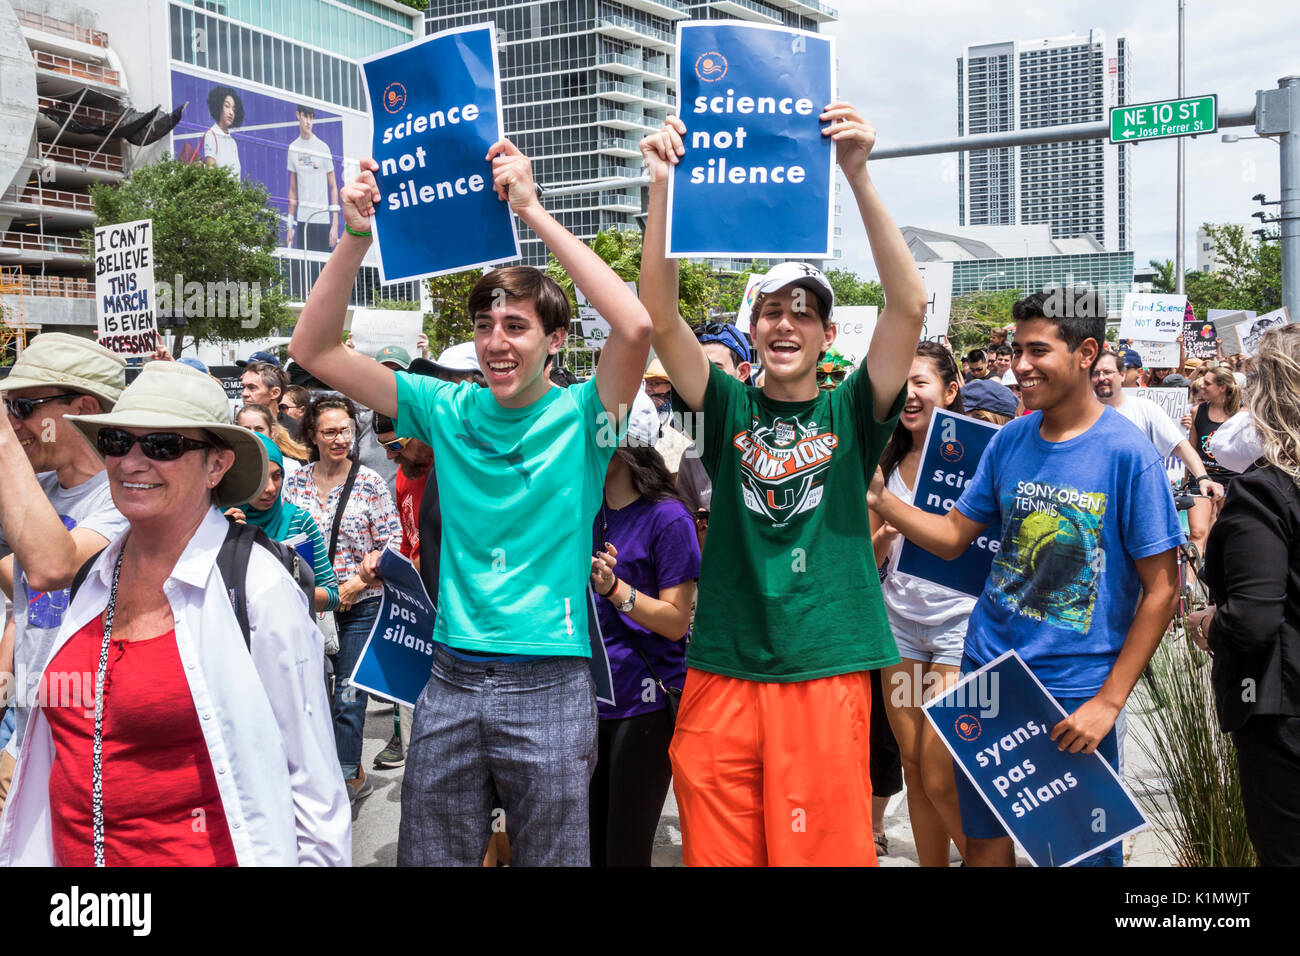 Miami Florida,Museum Park,March for Science,protest,rally,sign,protester,marching,signs,posters,teen teens teenager teenagers boy boys,male kid kids c Stock Photo